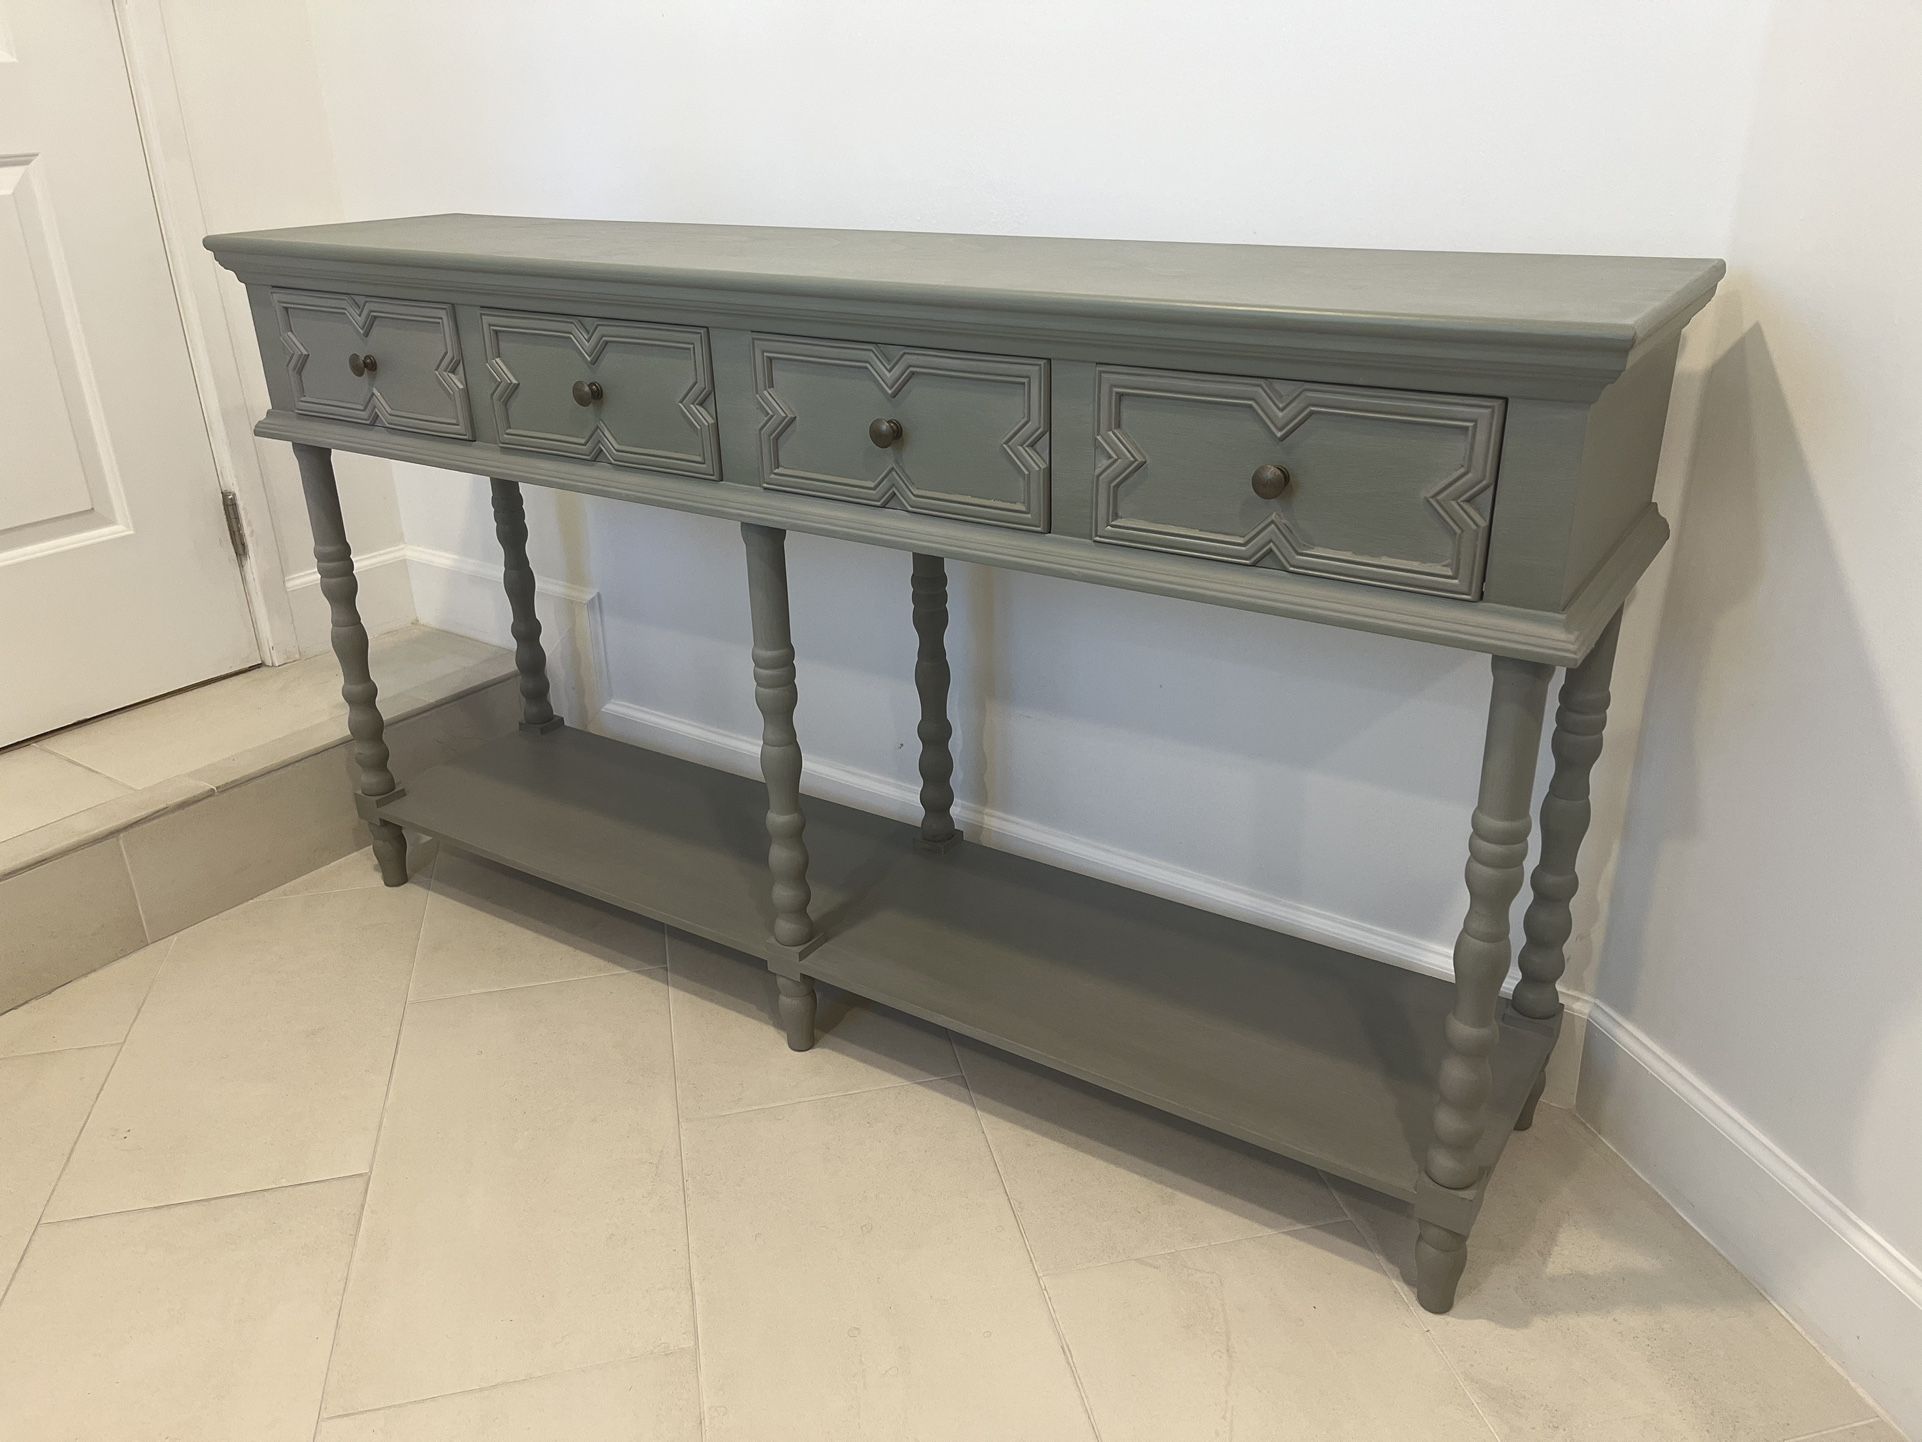 Country cottage farmhouse console table In gray - Like New